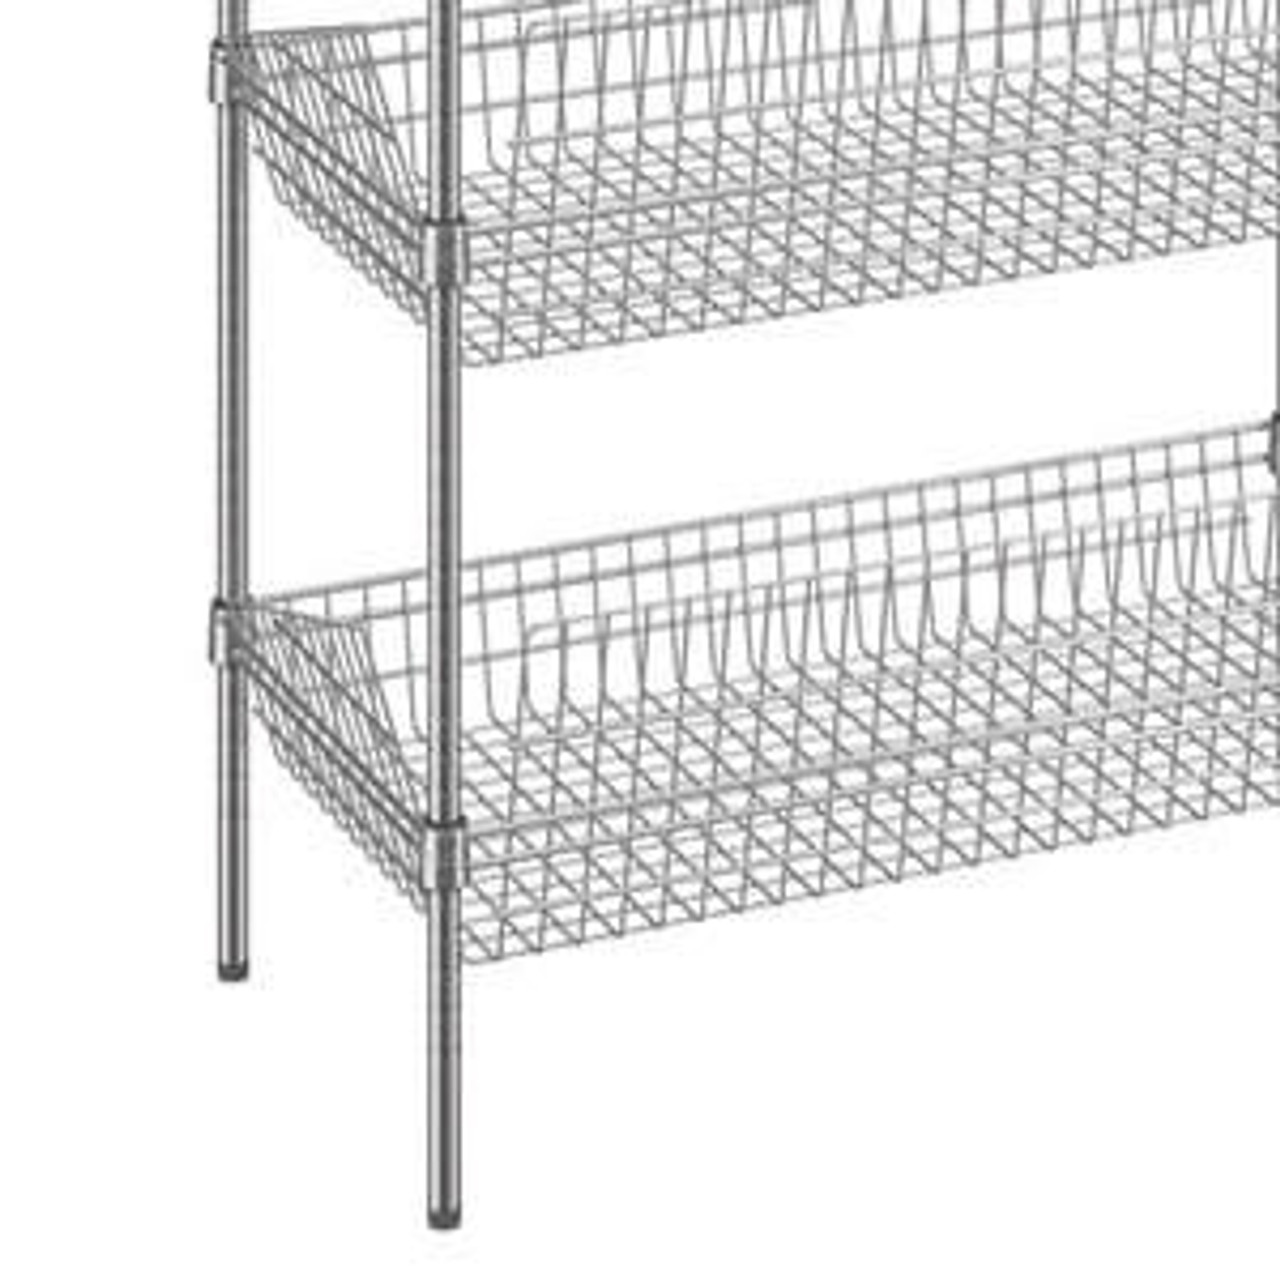 Chicken Pieces CP 18" x 36" x 74" NSF Chrome Stationary 5 Basket Retail Storage Display Stand | Organize and Showcase with Ease 